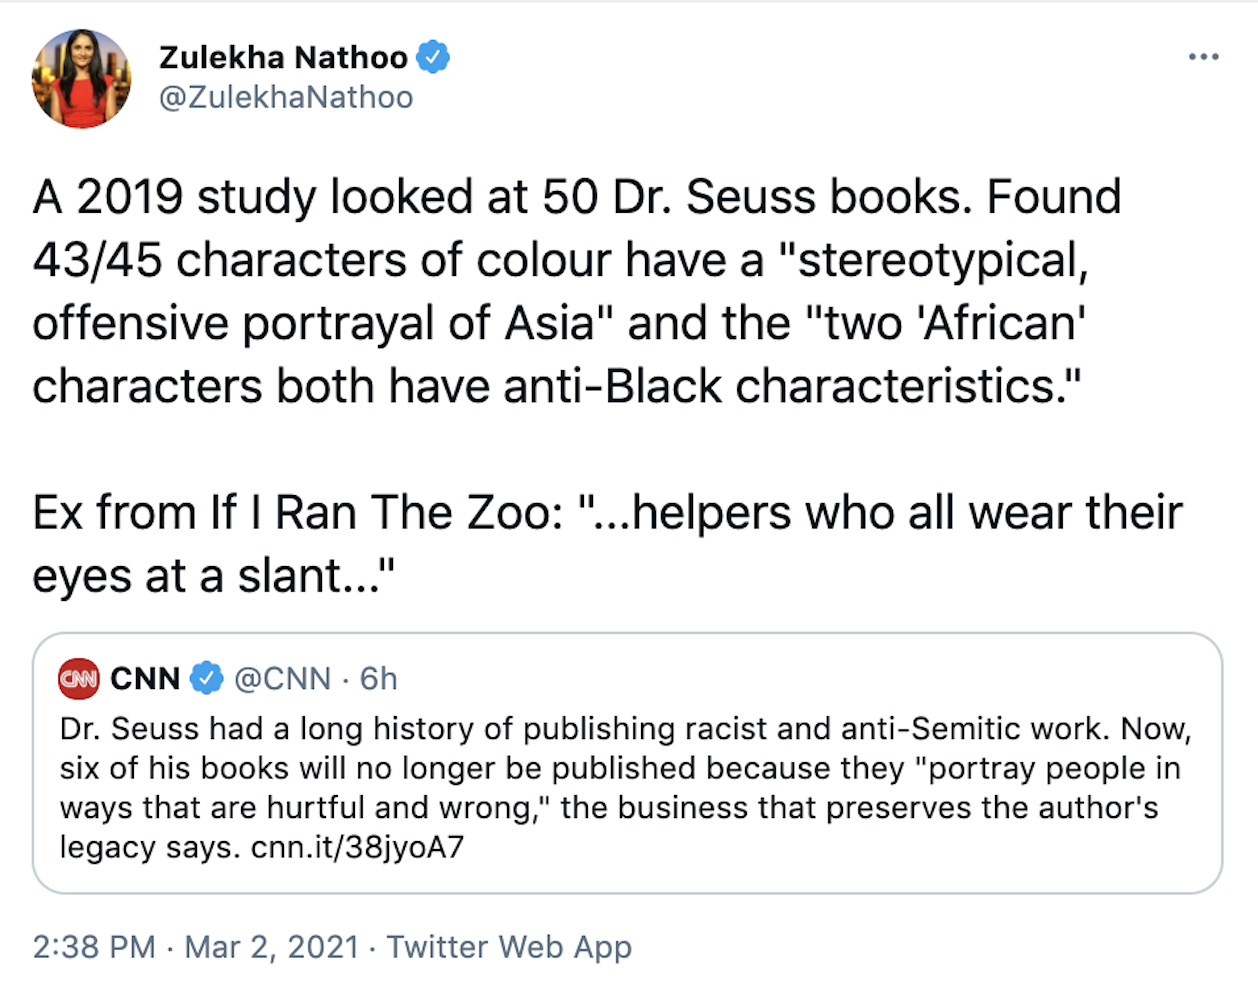 A 2019 study looked at 50 Dr. Seuss books. Found 43/45 characters of colour have a "stereotypical, offensive portrayal of Asia" and the "two 'African' characters both have anti-Black characteristics."  Ex from If I Ran The Zoo: "...helpers who all wear their eyes at a slant..."